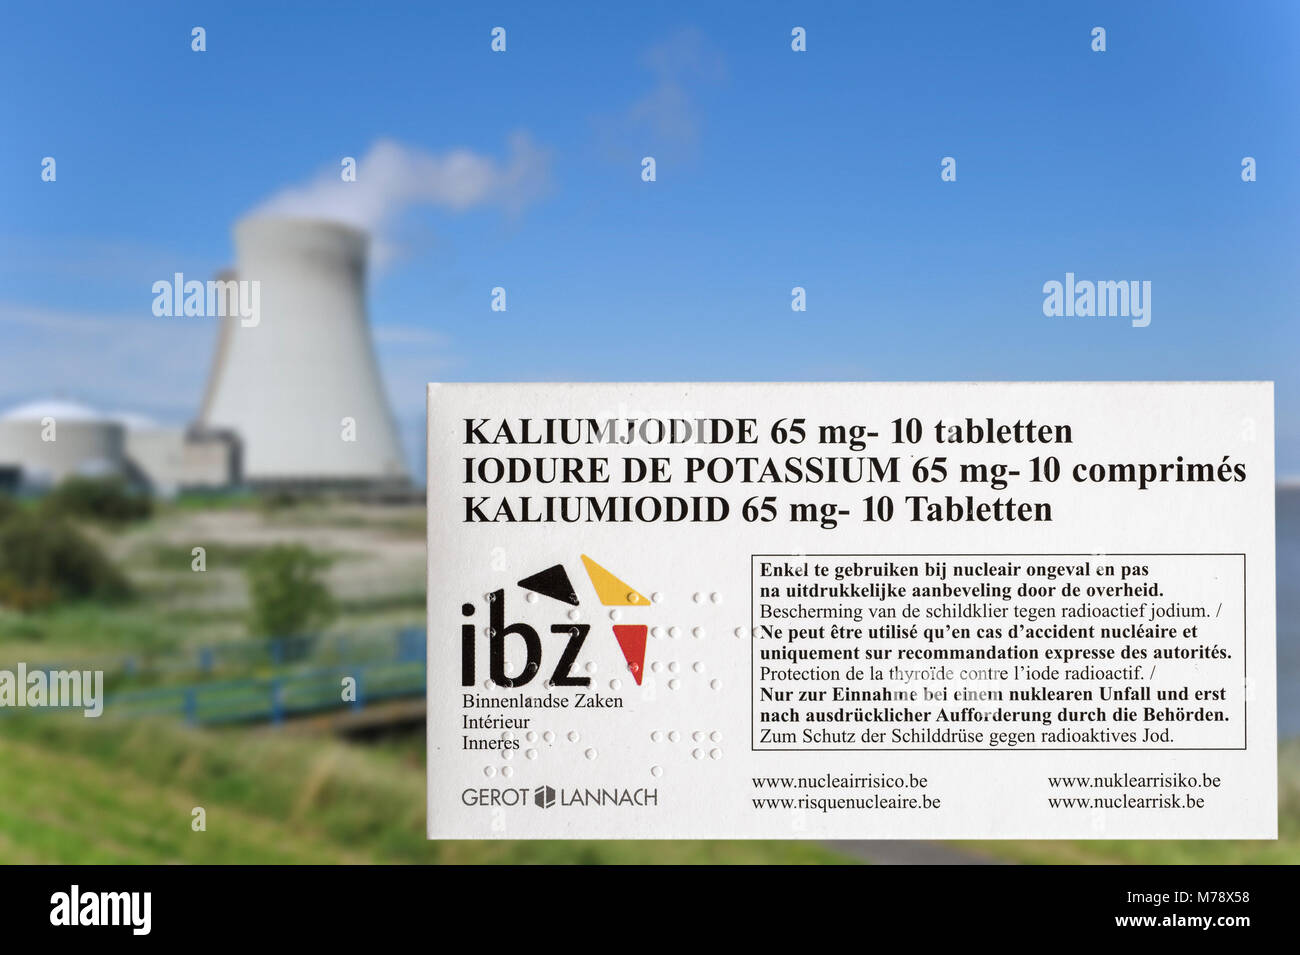 Doel nuclear power plant and iodide tablets to protect Belgian residents from radioactive fall-out in the event of an accident or leak in Belgium Stock Photo